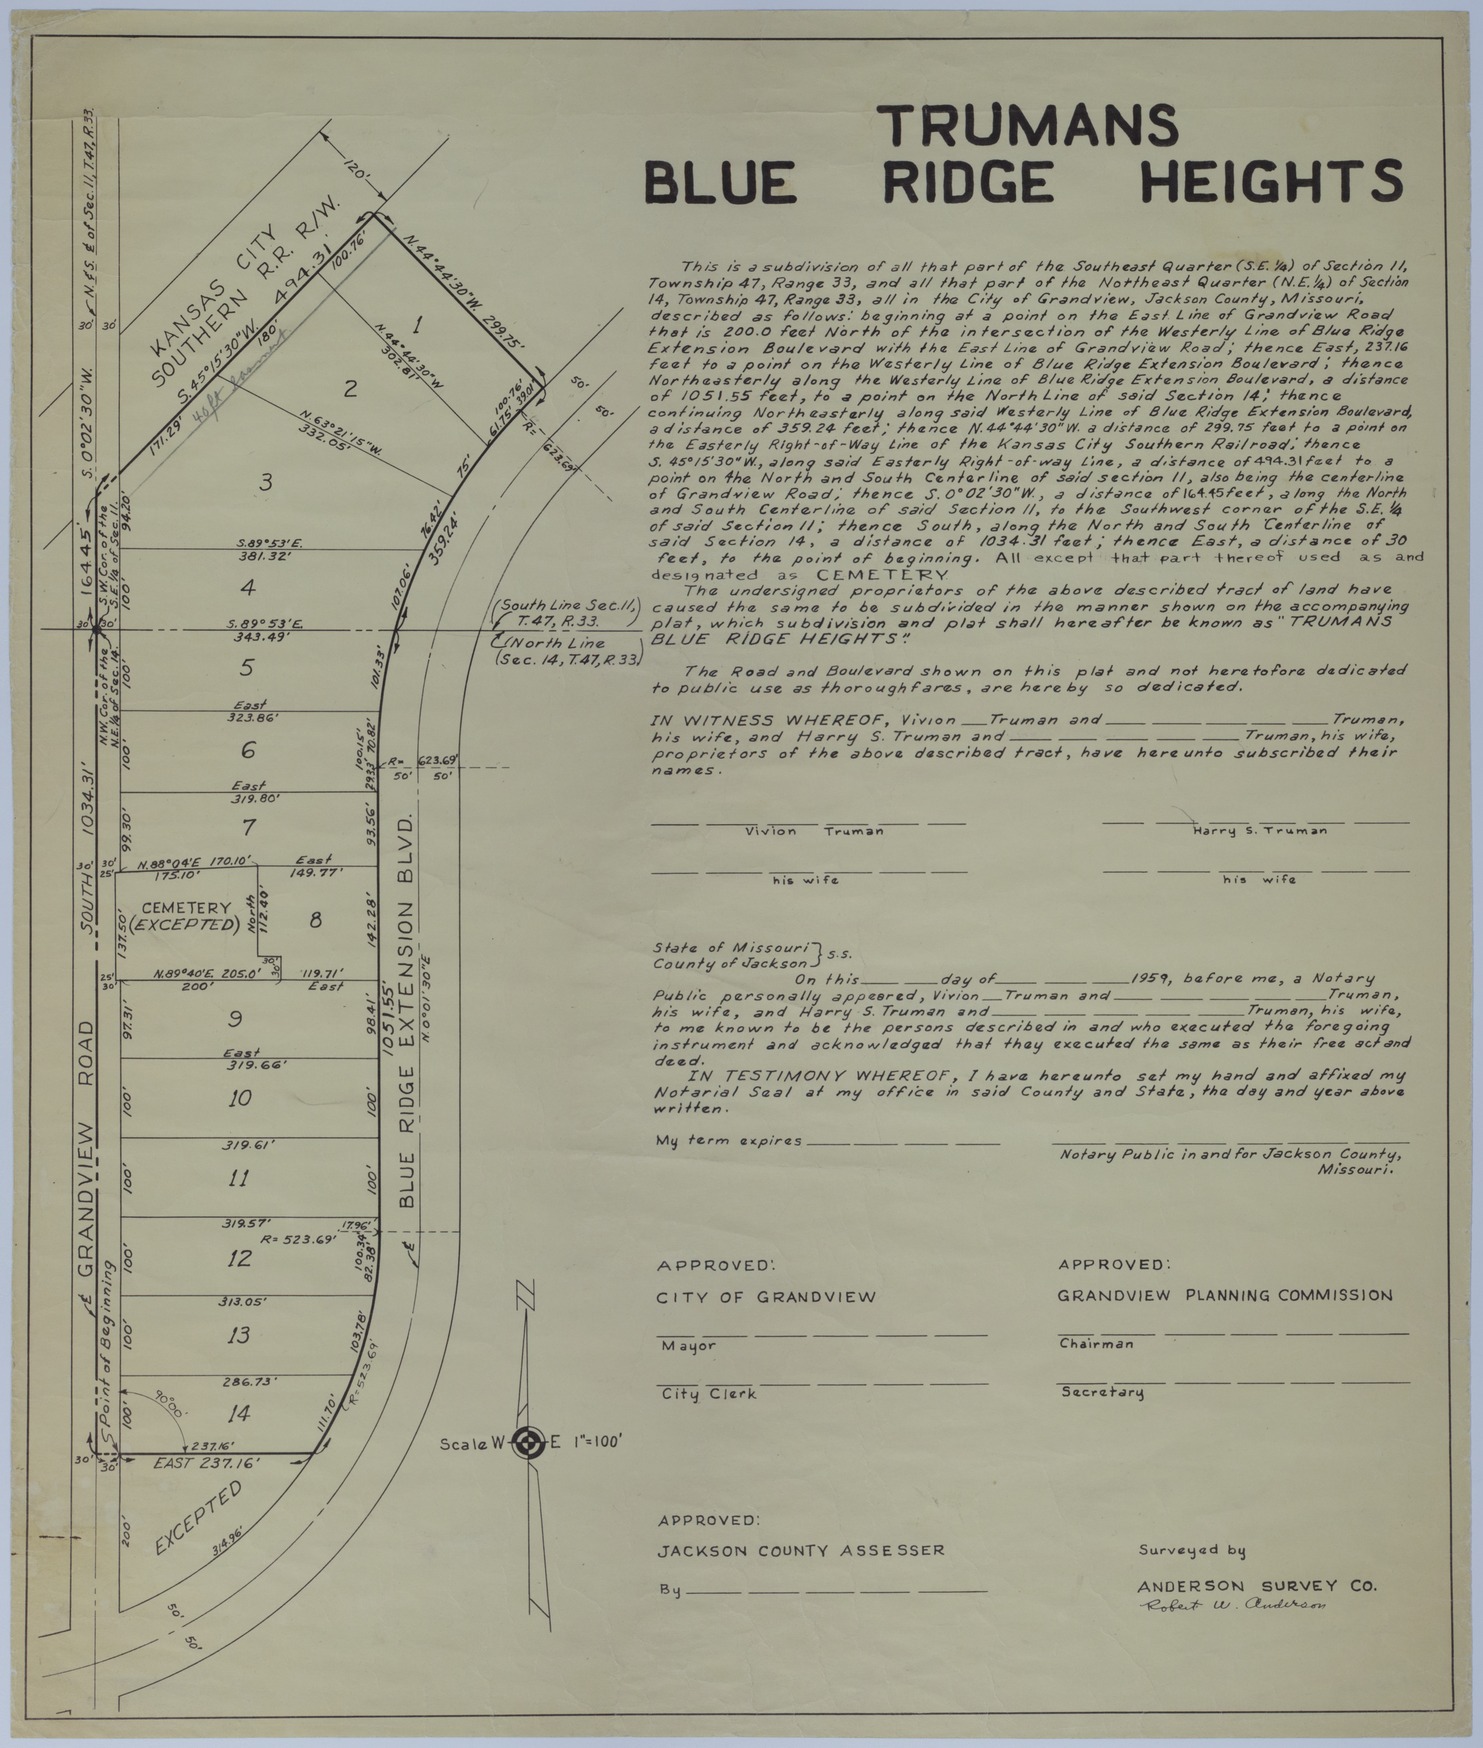 Drawing of the Planned Truman's Blue Ridge Heights in Grandview, Missouri